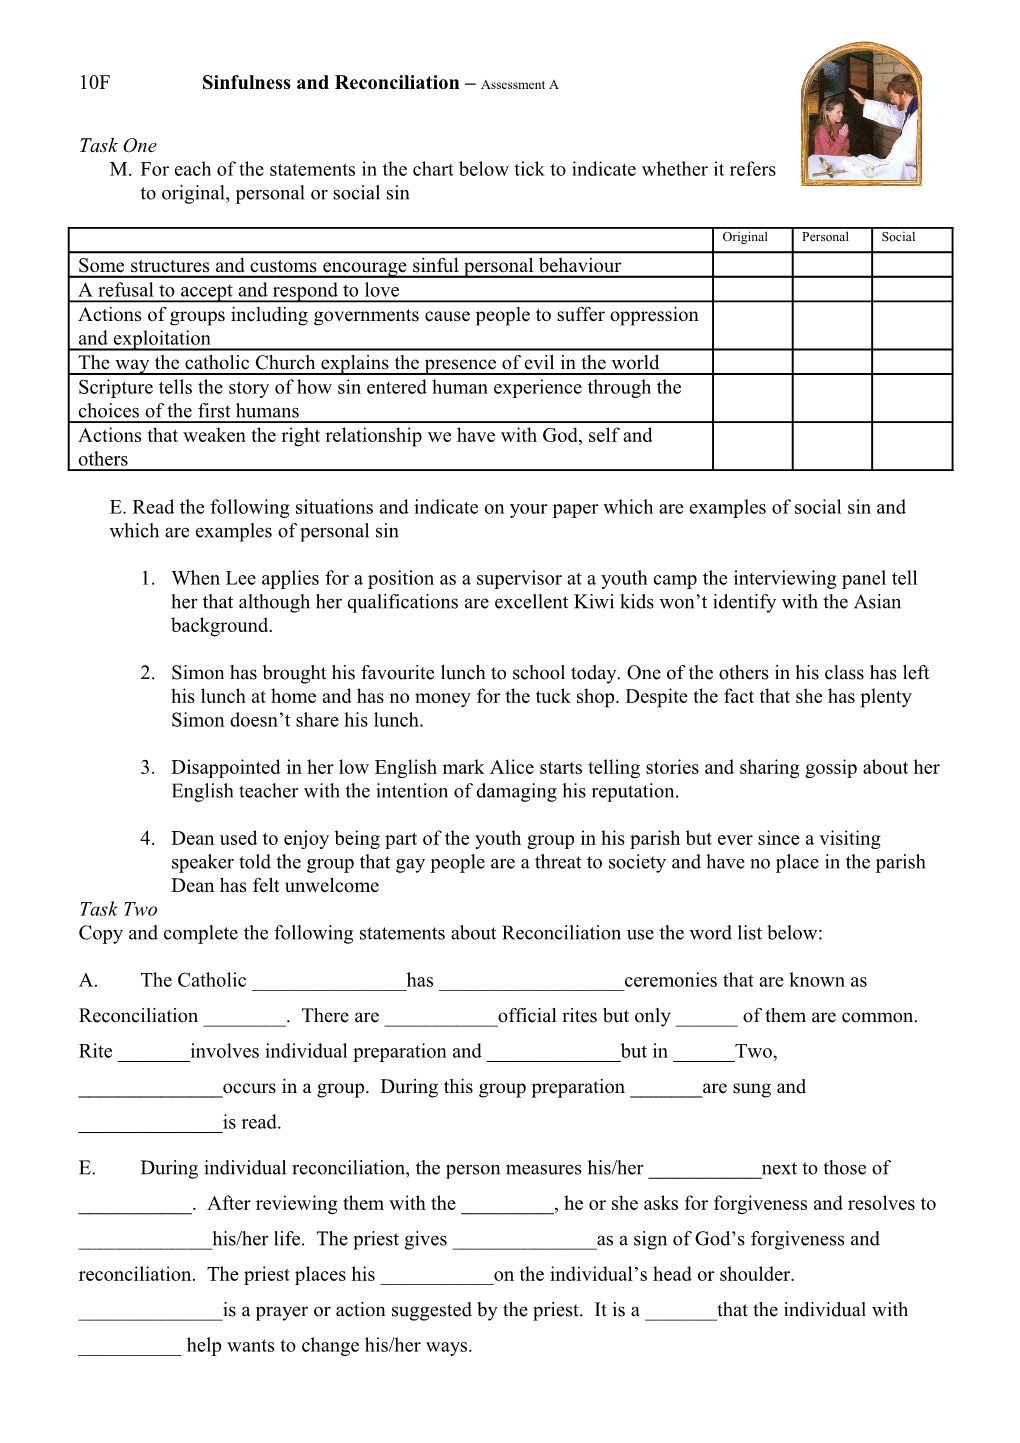 10F Sinfulness and Reconciliation Assessment A